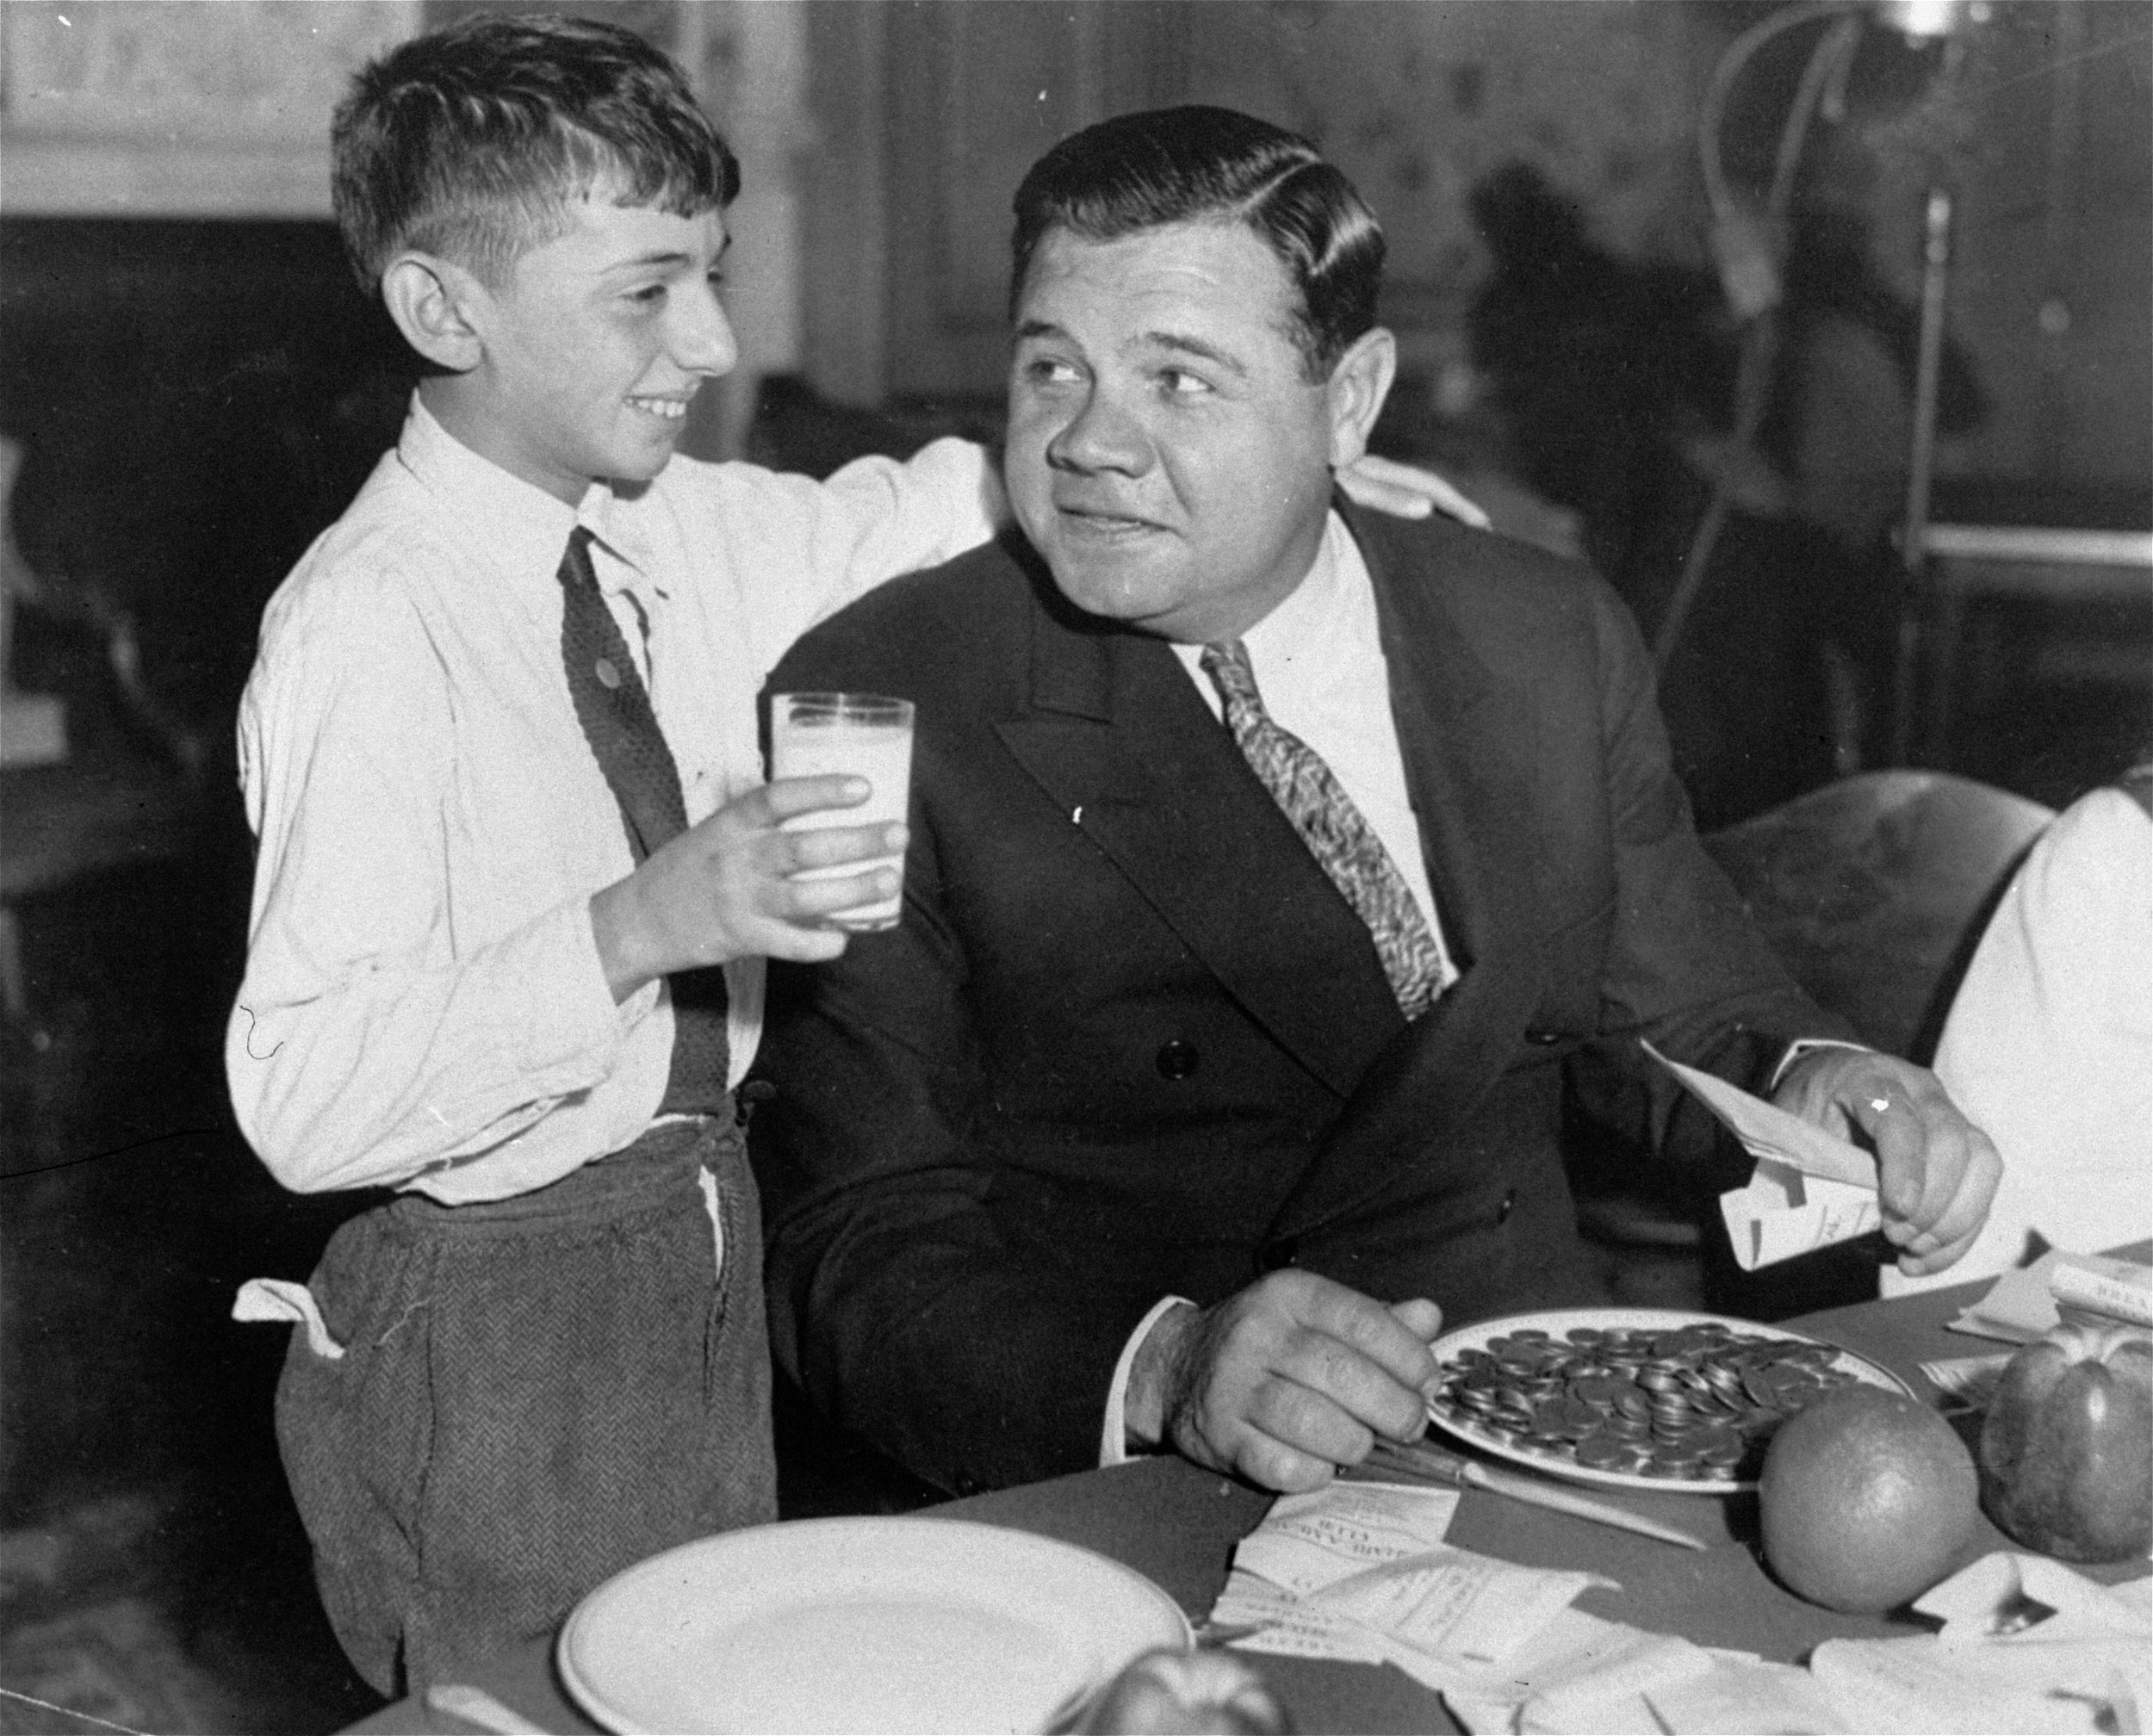  Babe Ruth, the idol of American youth, pictured with a young admirer during a "Share a Meal" club dinner held in New York, Dec. 18, 1932.  The movement, which is made up of boys and girls clubs throughout the city, is seeking to raise as much money 